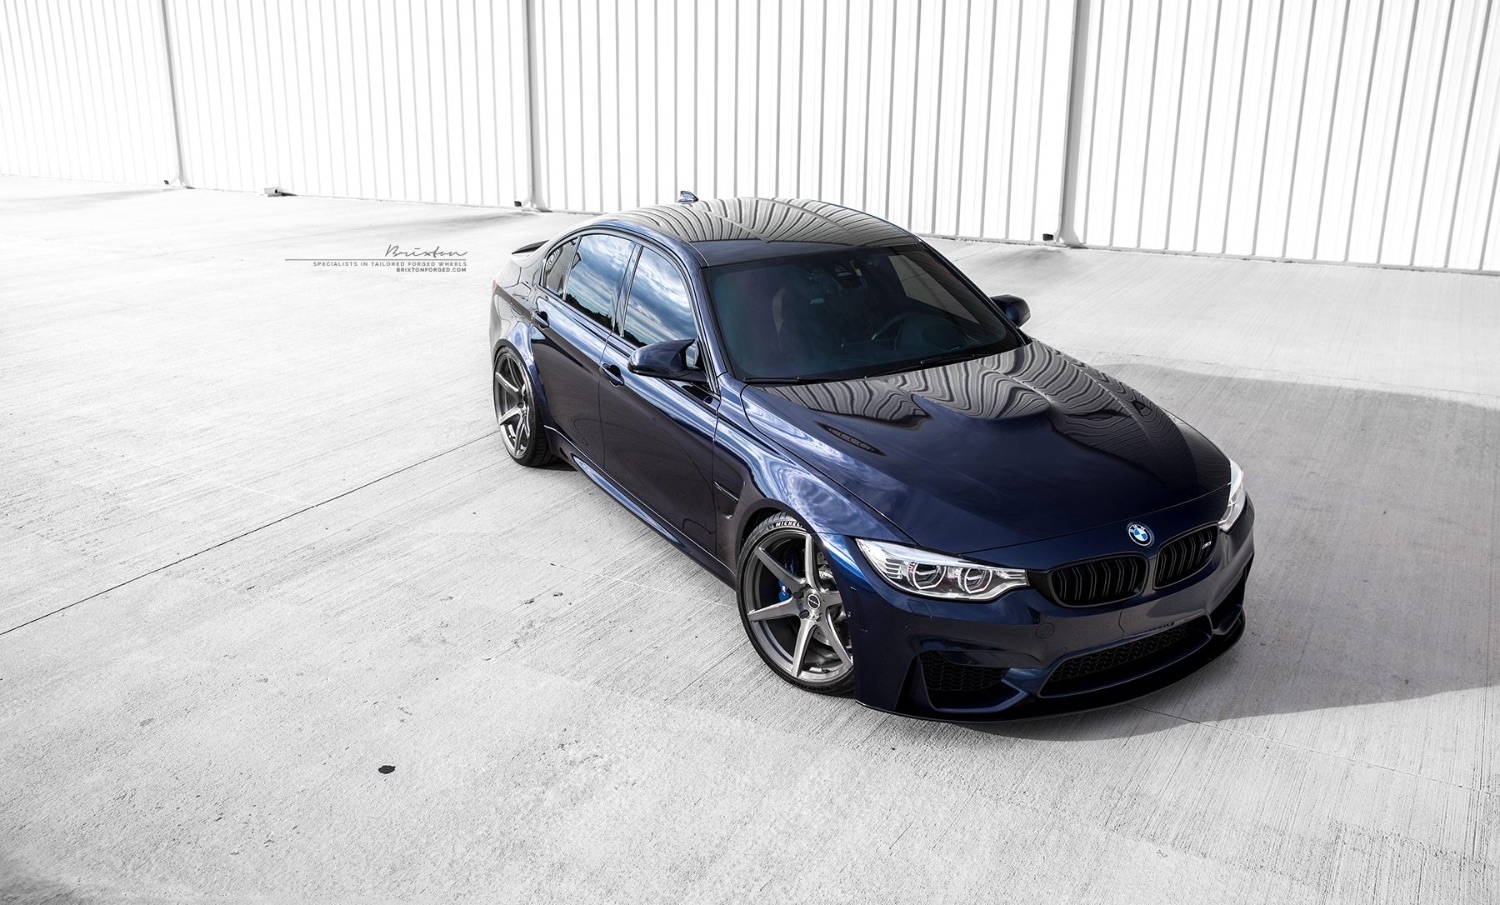 tanzanite-blue-m3-f80-bmw-brixton-forged-wheels-s60-ultrasport-brushed-double-tint-concave-1-piece-forged-wheels-11-1800x1086